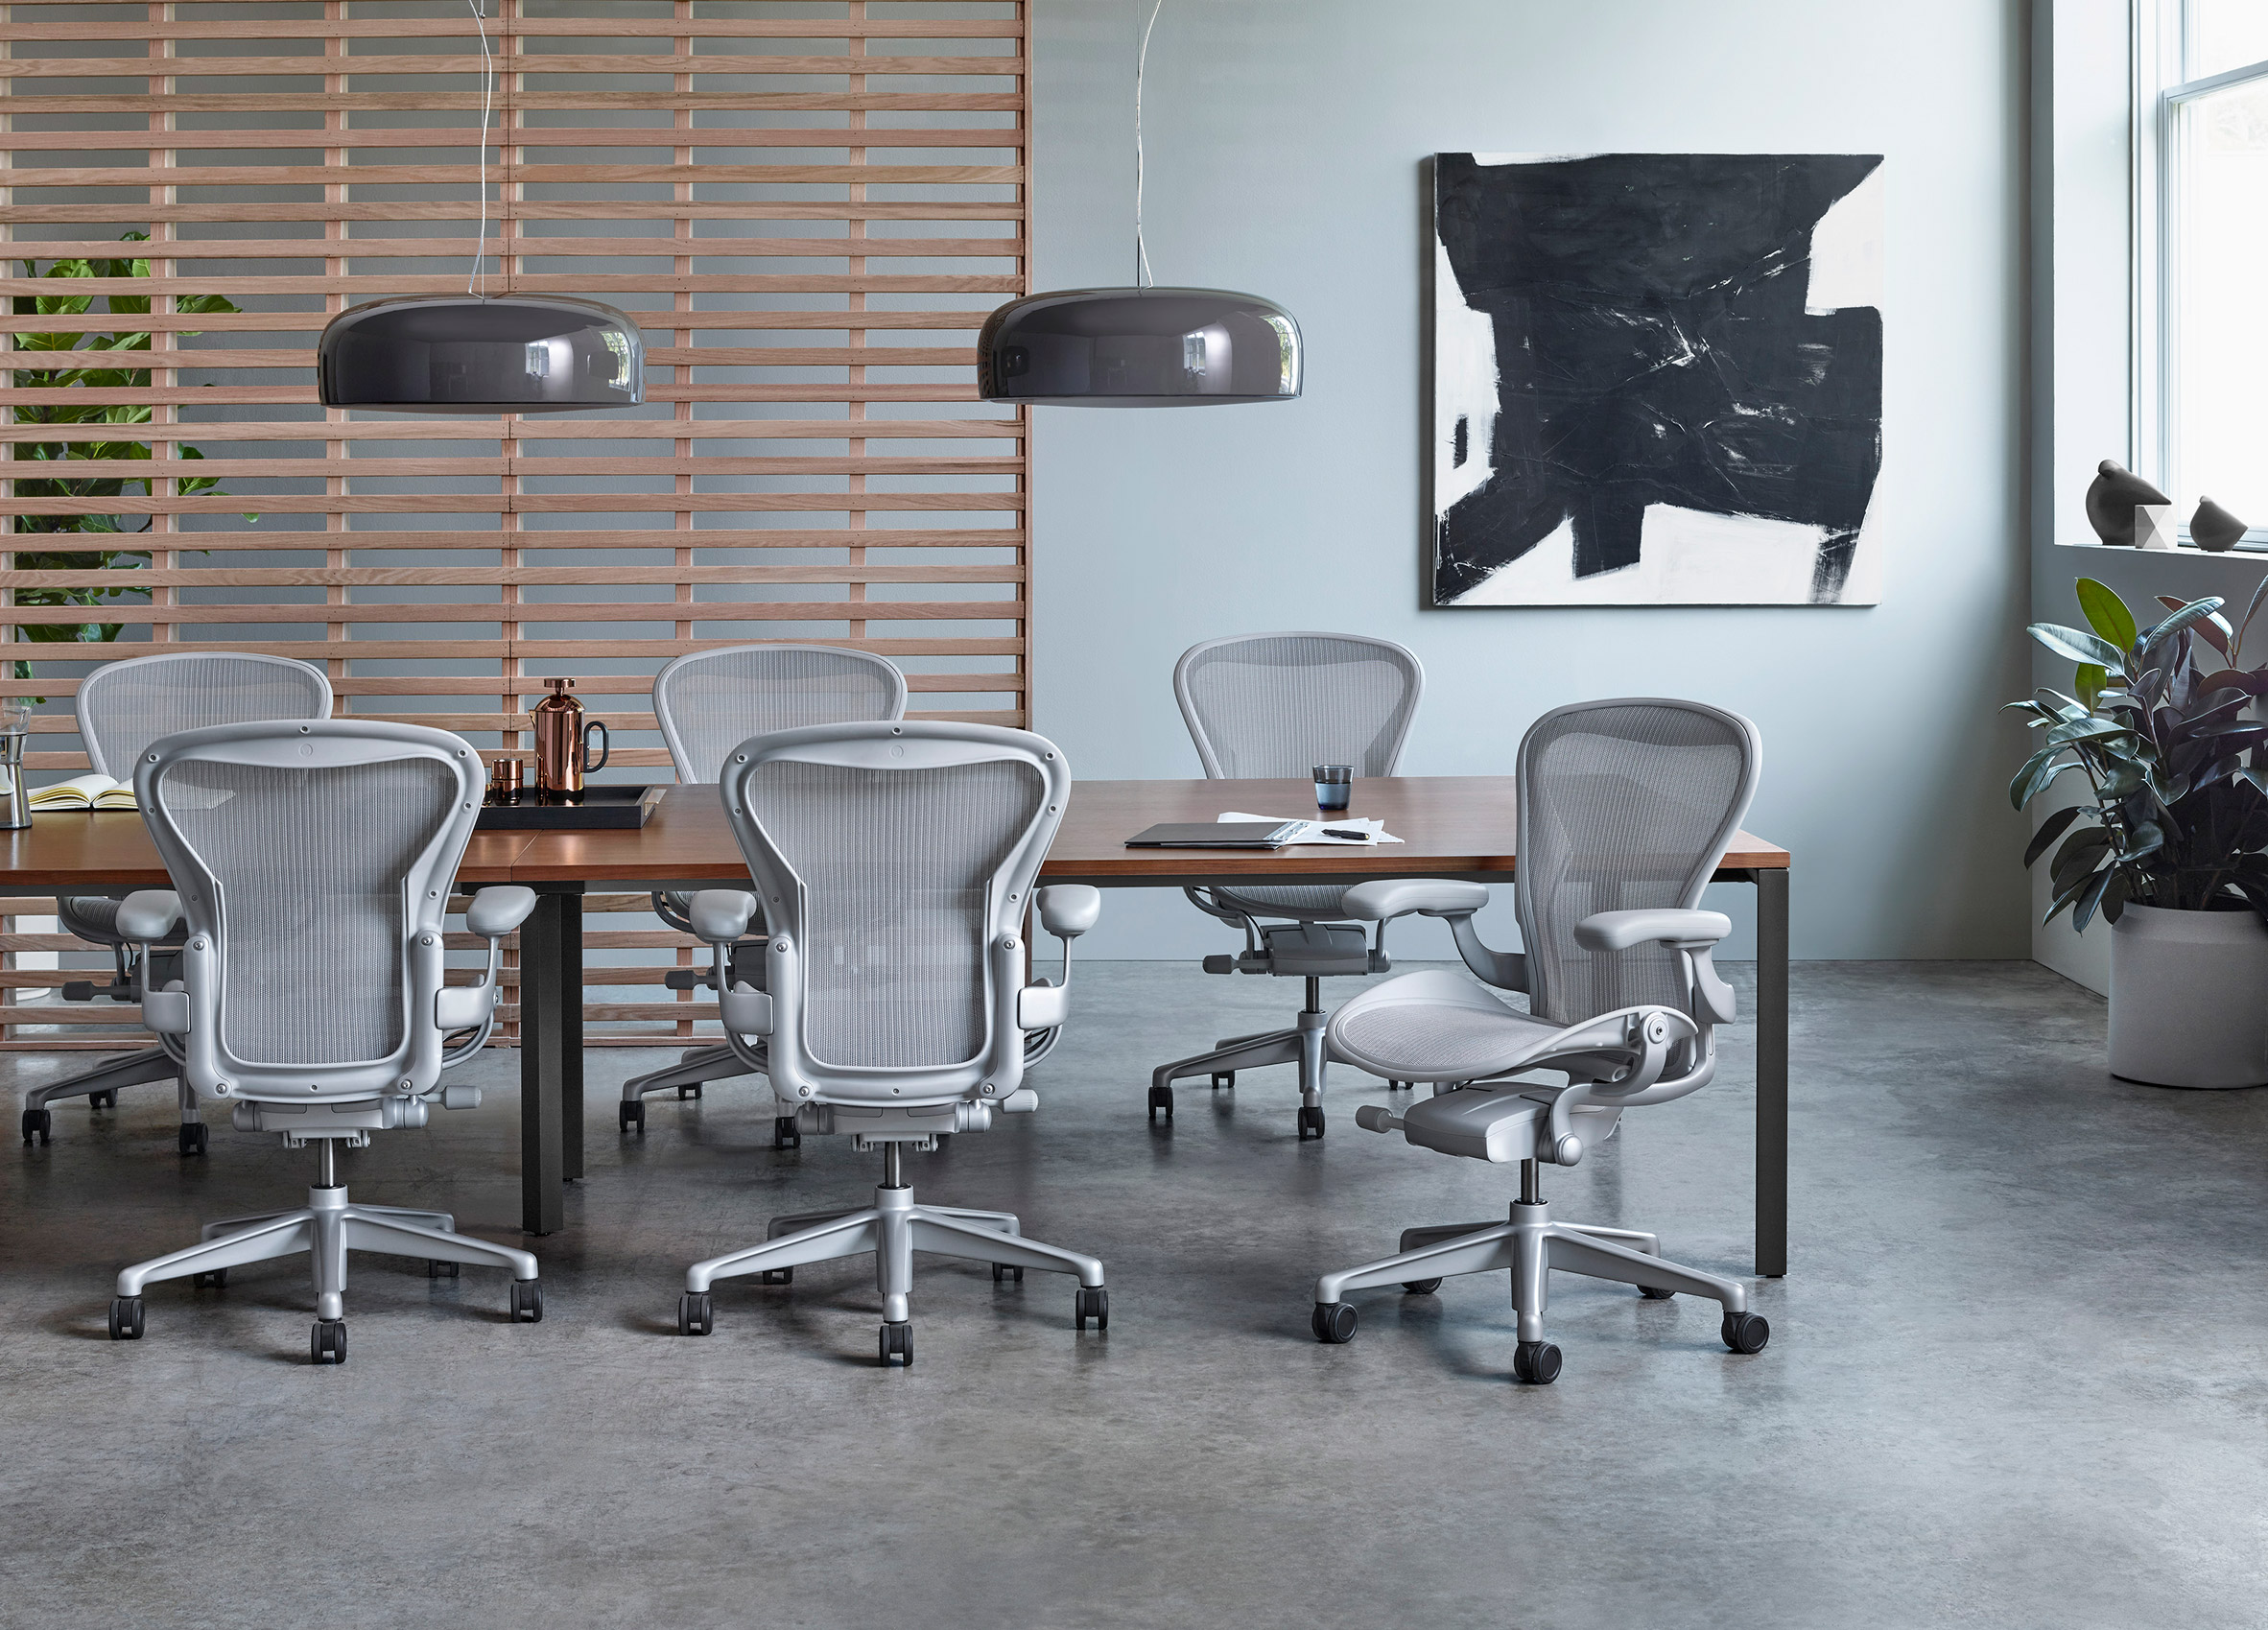 Herman Miller updates Aeron chair by Bill Stumpf and Don Chadwick